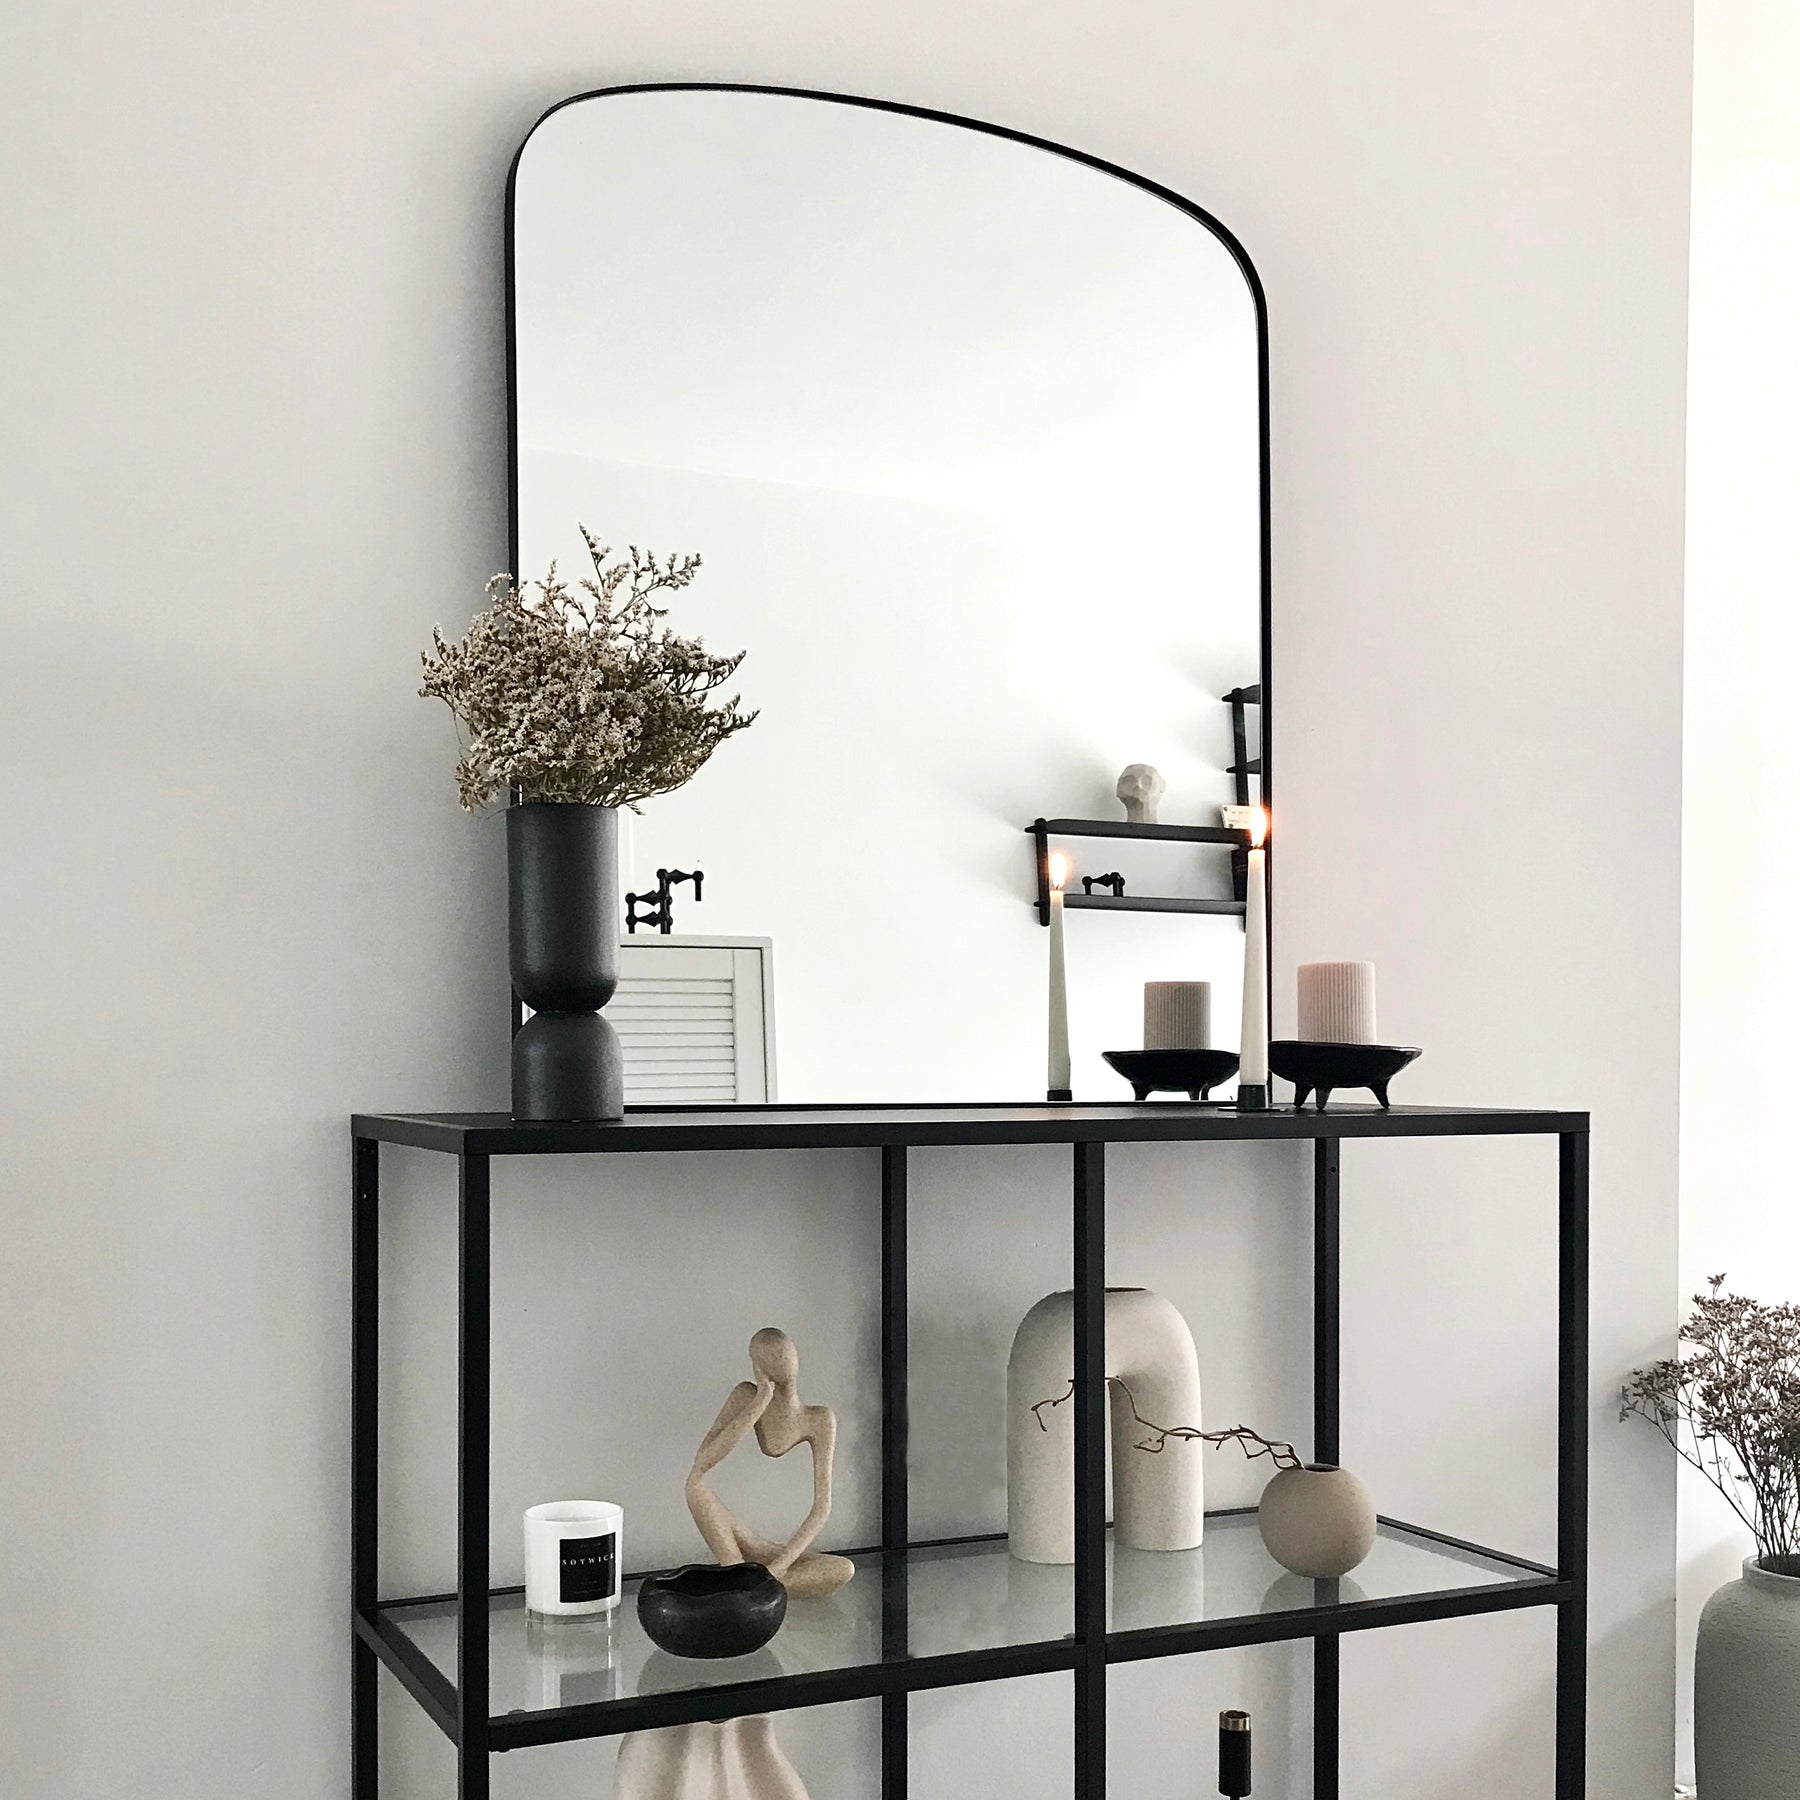 Bowness - Black Contemporary Arched Metal Wall Mirror 90cm x 75cm